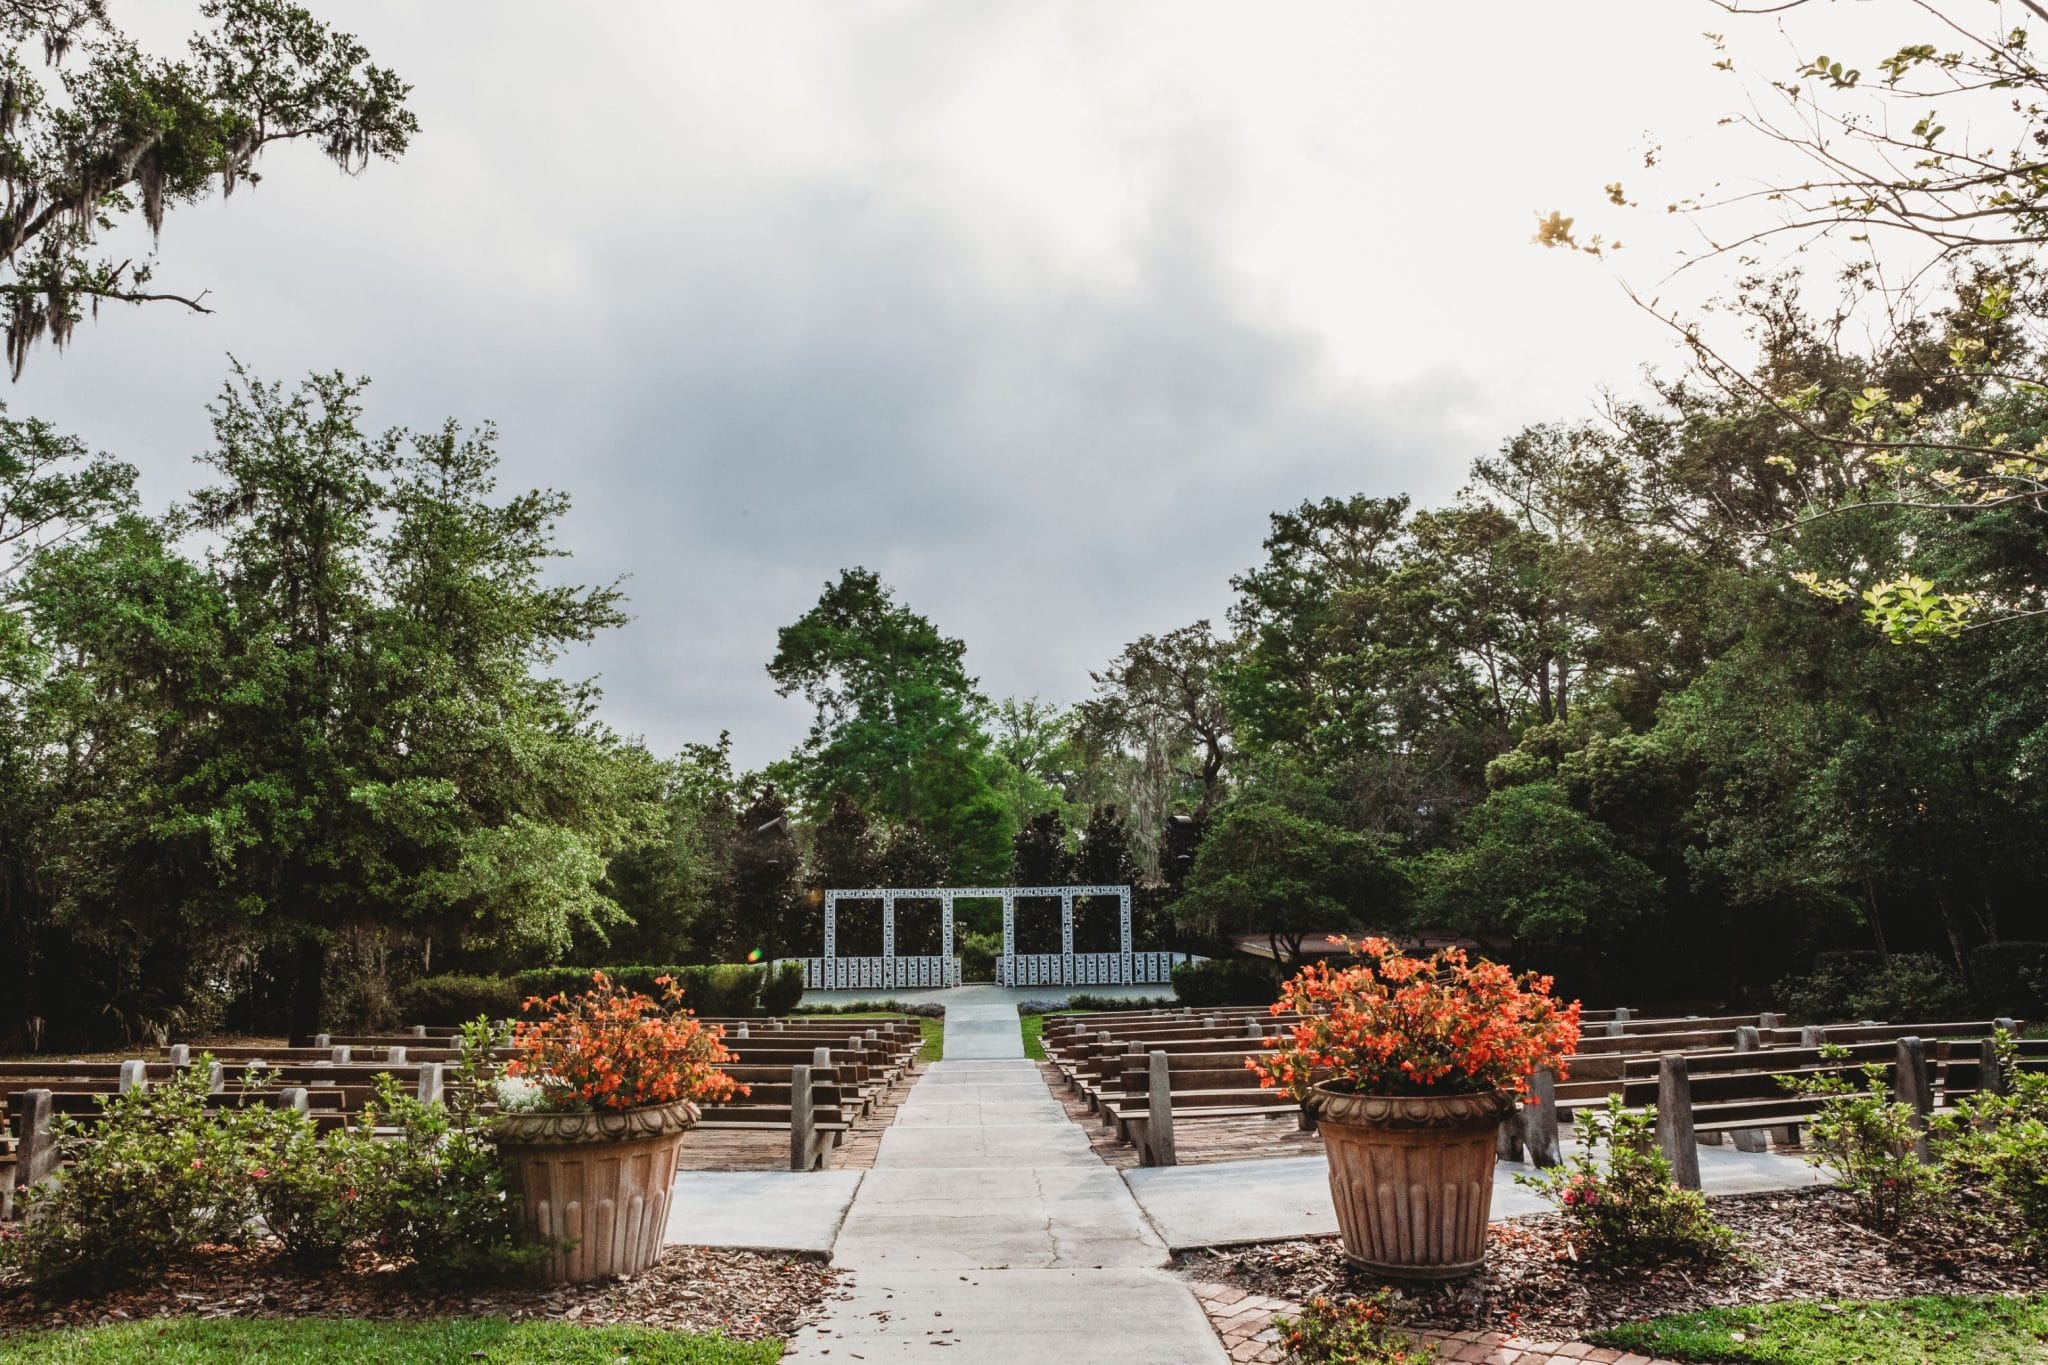 wedding ceremony venue in garden setting with wood benches and white trellis at Azalea Lodge at Mead Botanical Garden